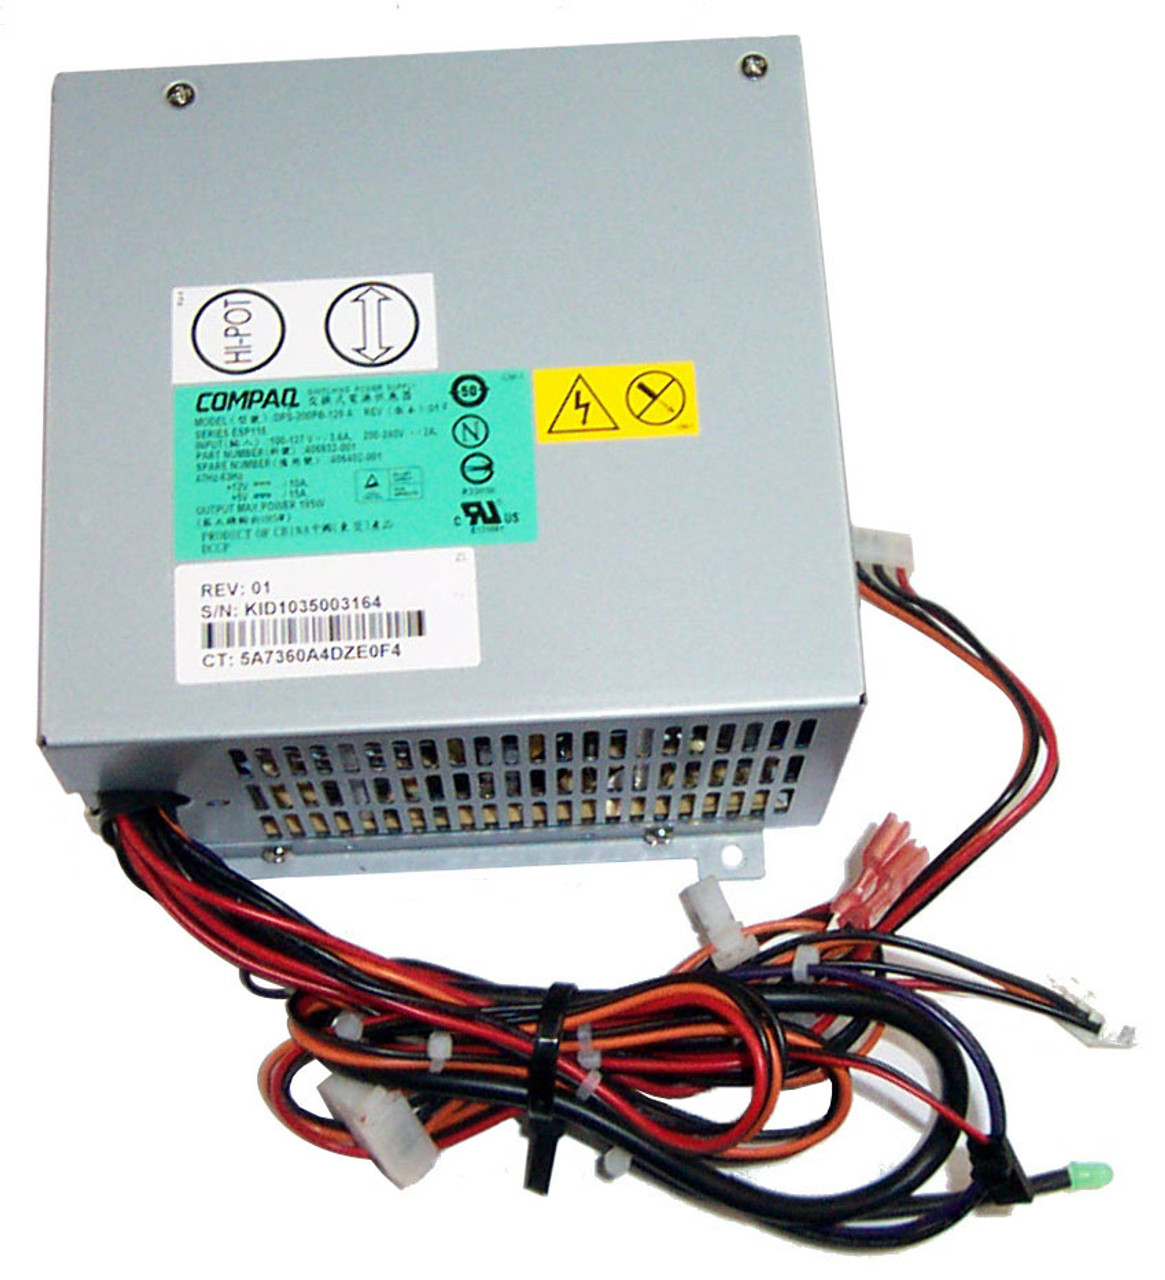 DPS-200PB-126A HP 200-Watts AC ATX Power Supply with Active PFC for Vectra VL400